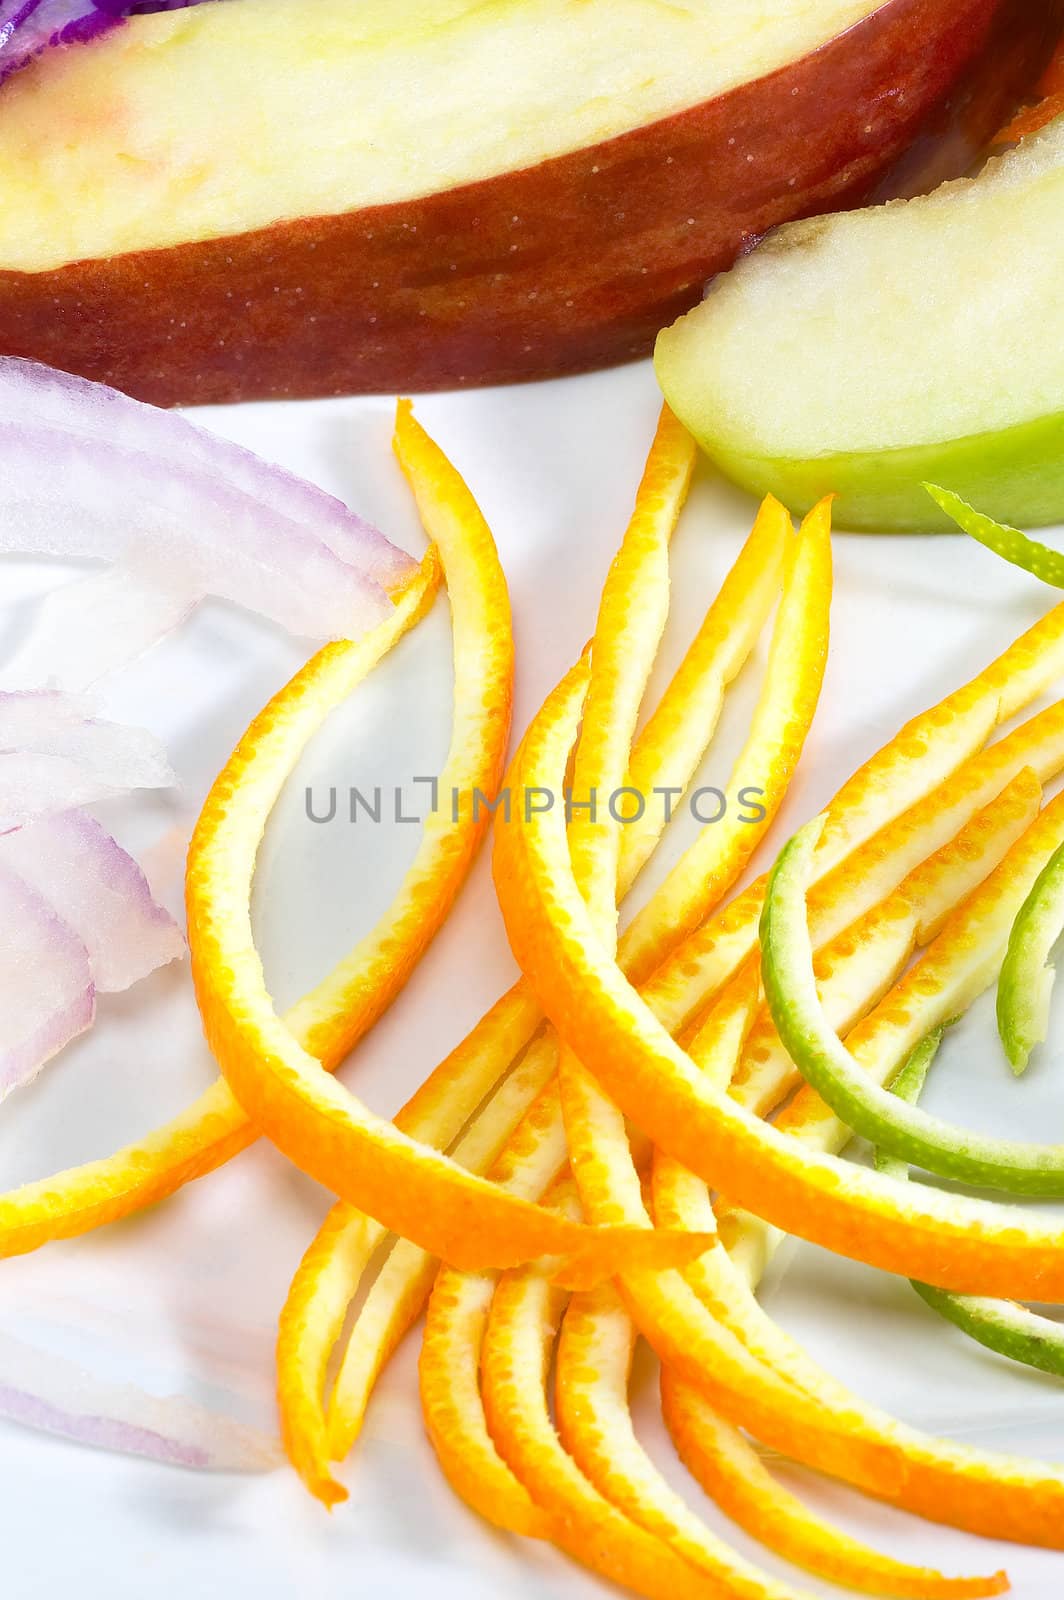 colorfull fresh salad ingredient on a plate prepared cutted